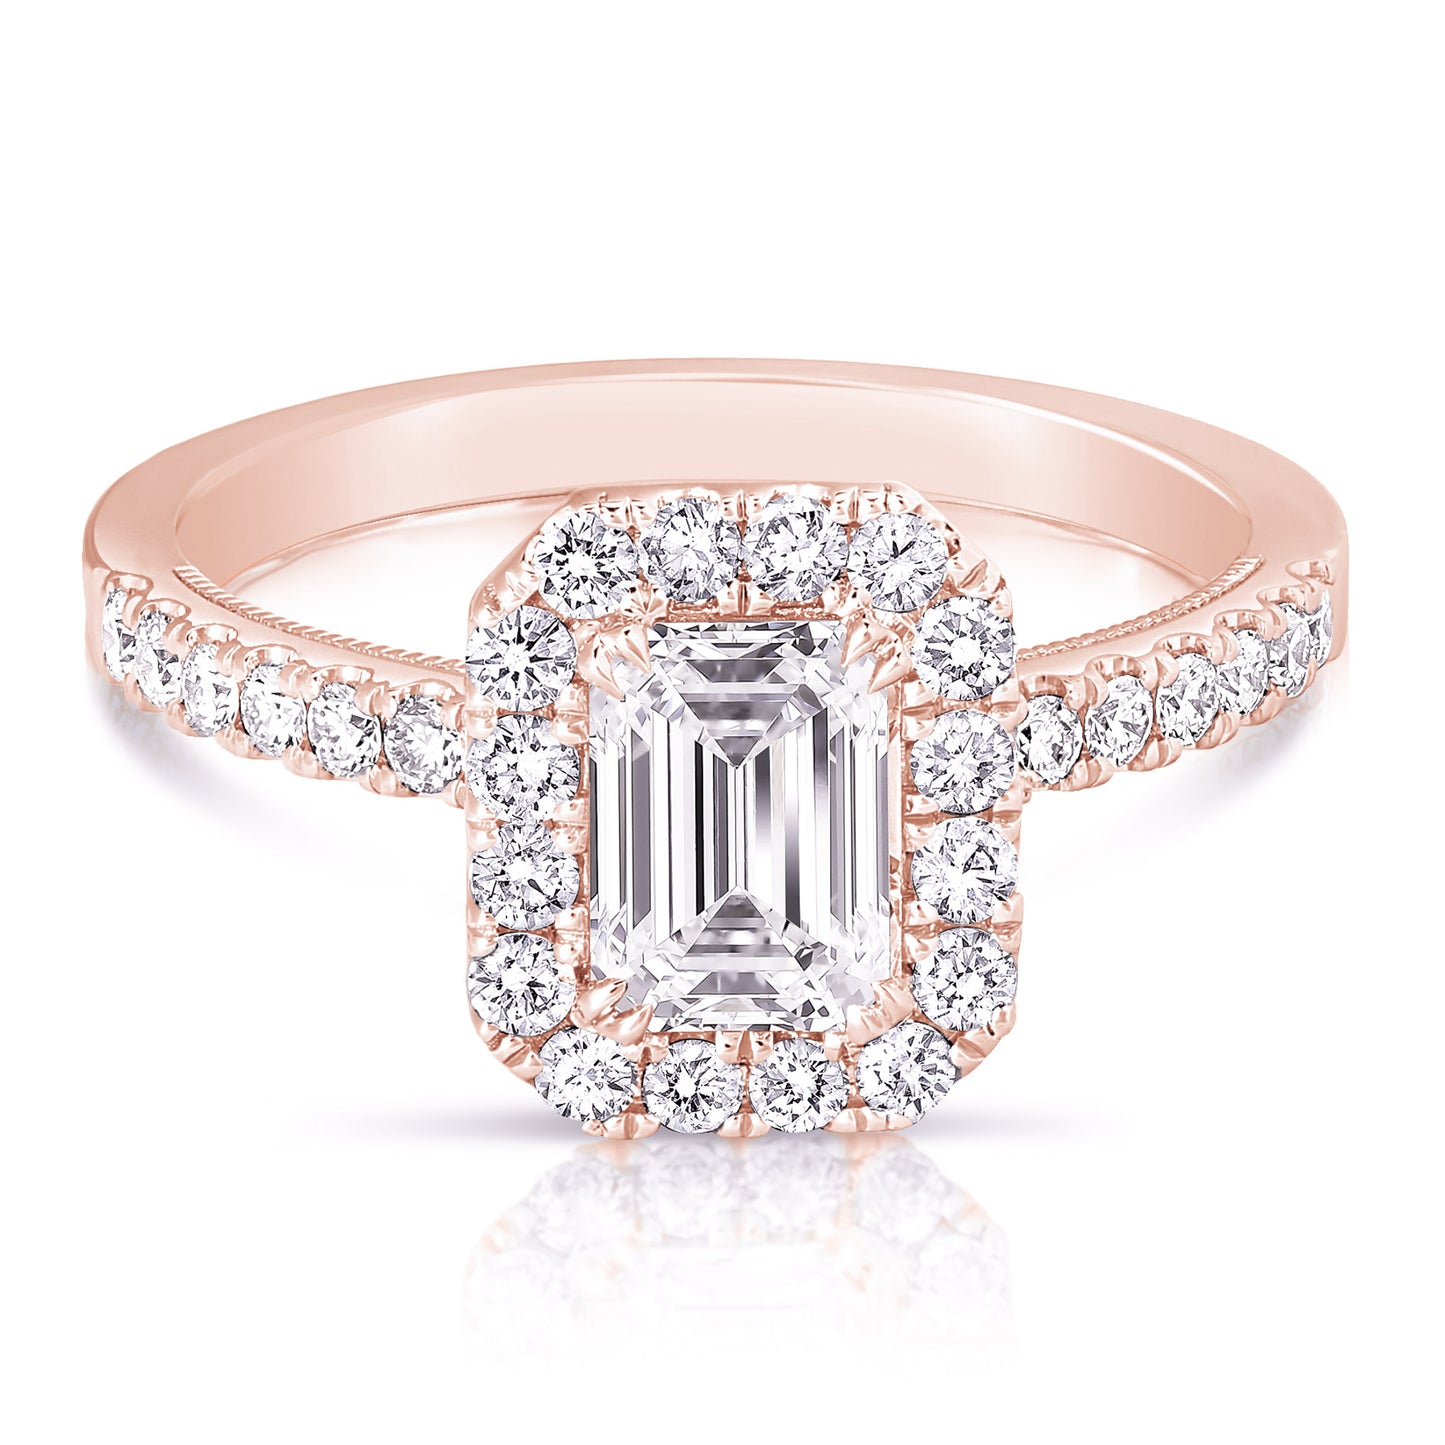 1 CT CENTER EMERALD CUT HALO LAB GROWN ENGAGEMENT RING